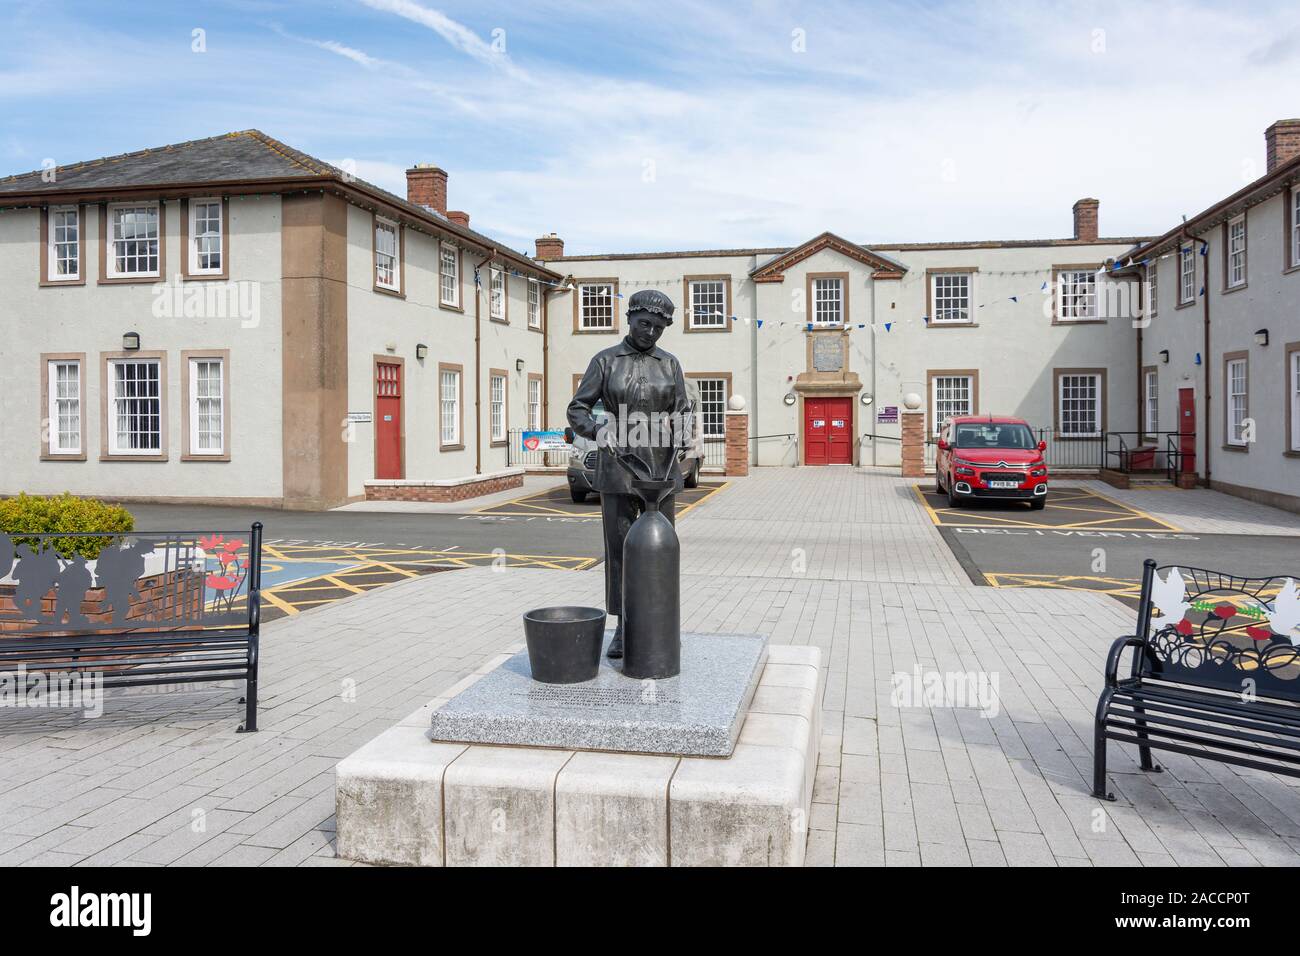 Munition Workers Statue and The Institute (Richard Greenhow Centre), Central Avenue, Gretna, Dumfries and Galloway, Scotland, United Kingdom Stock Photo